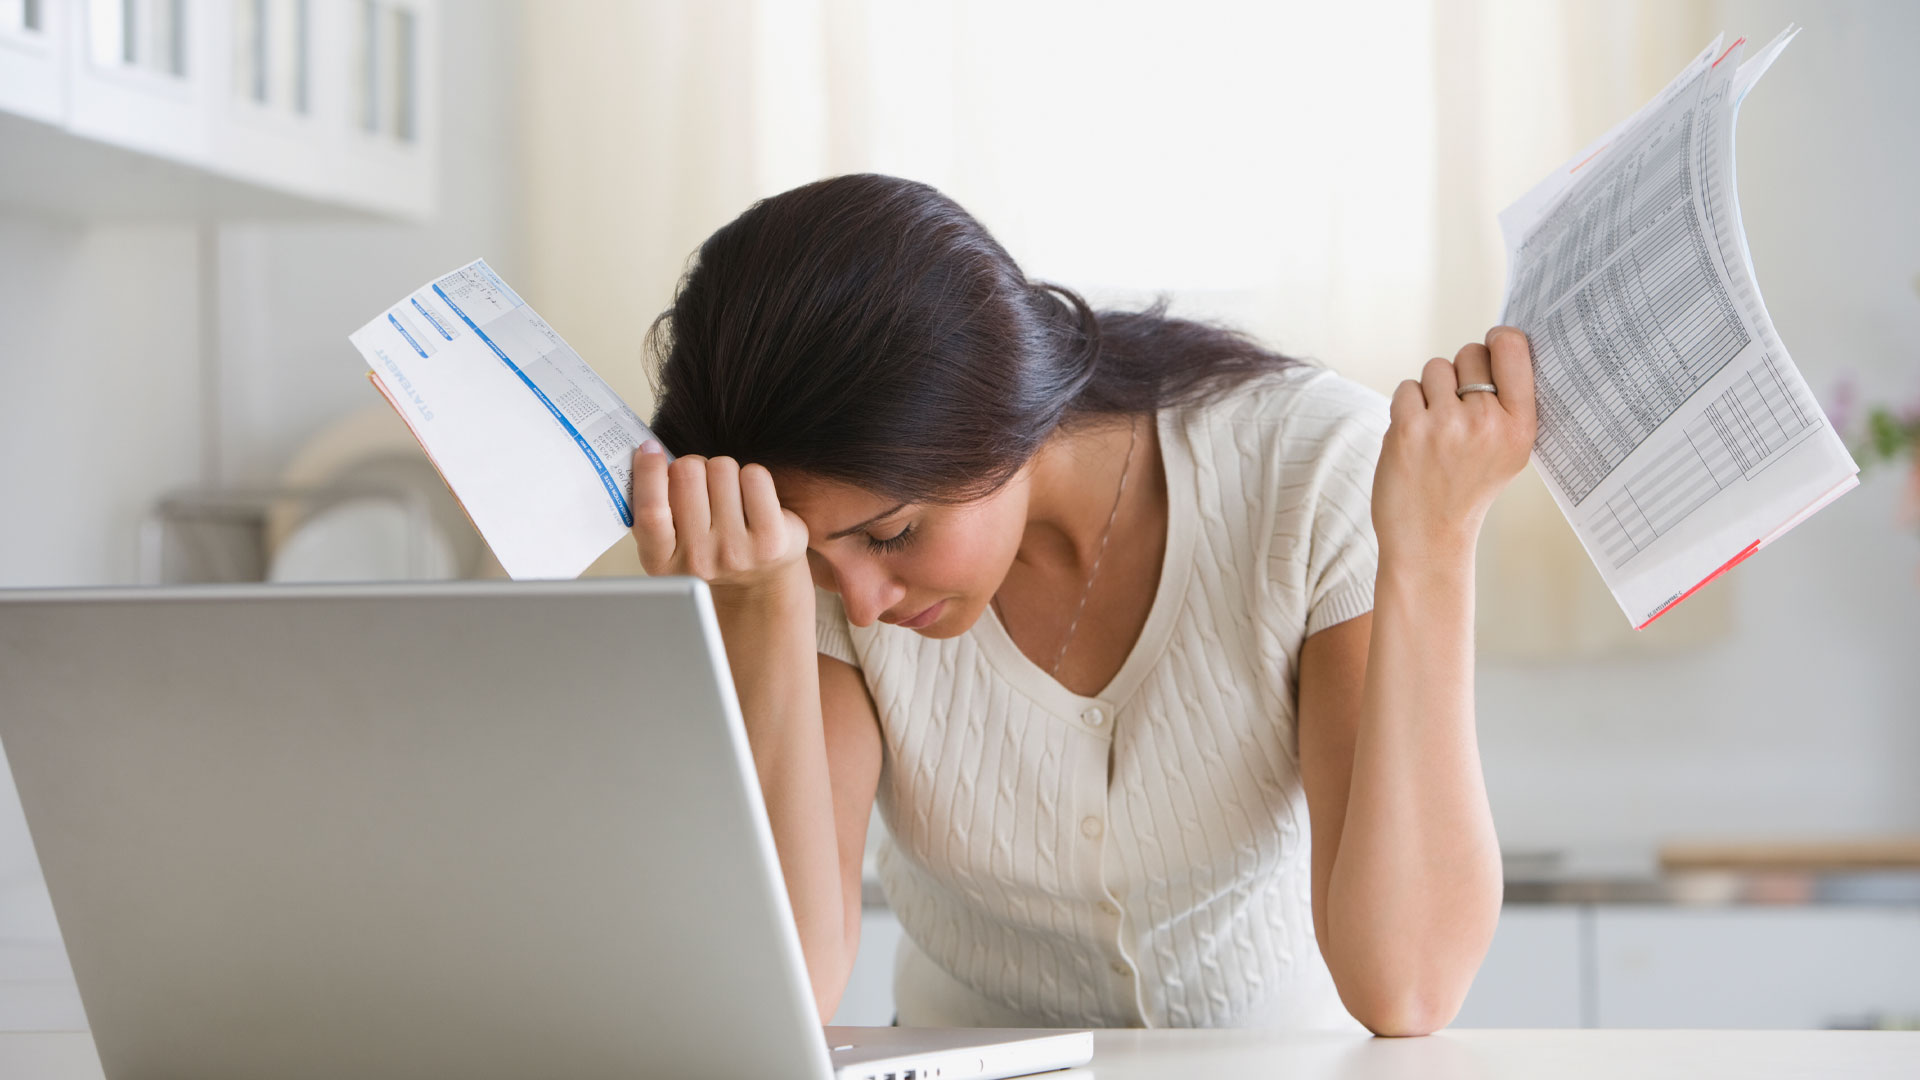 Stressed out woman holding financial documents and looking at homes for sale in NZ on her laptop.